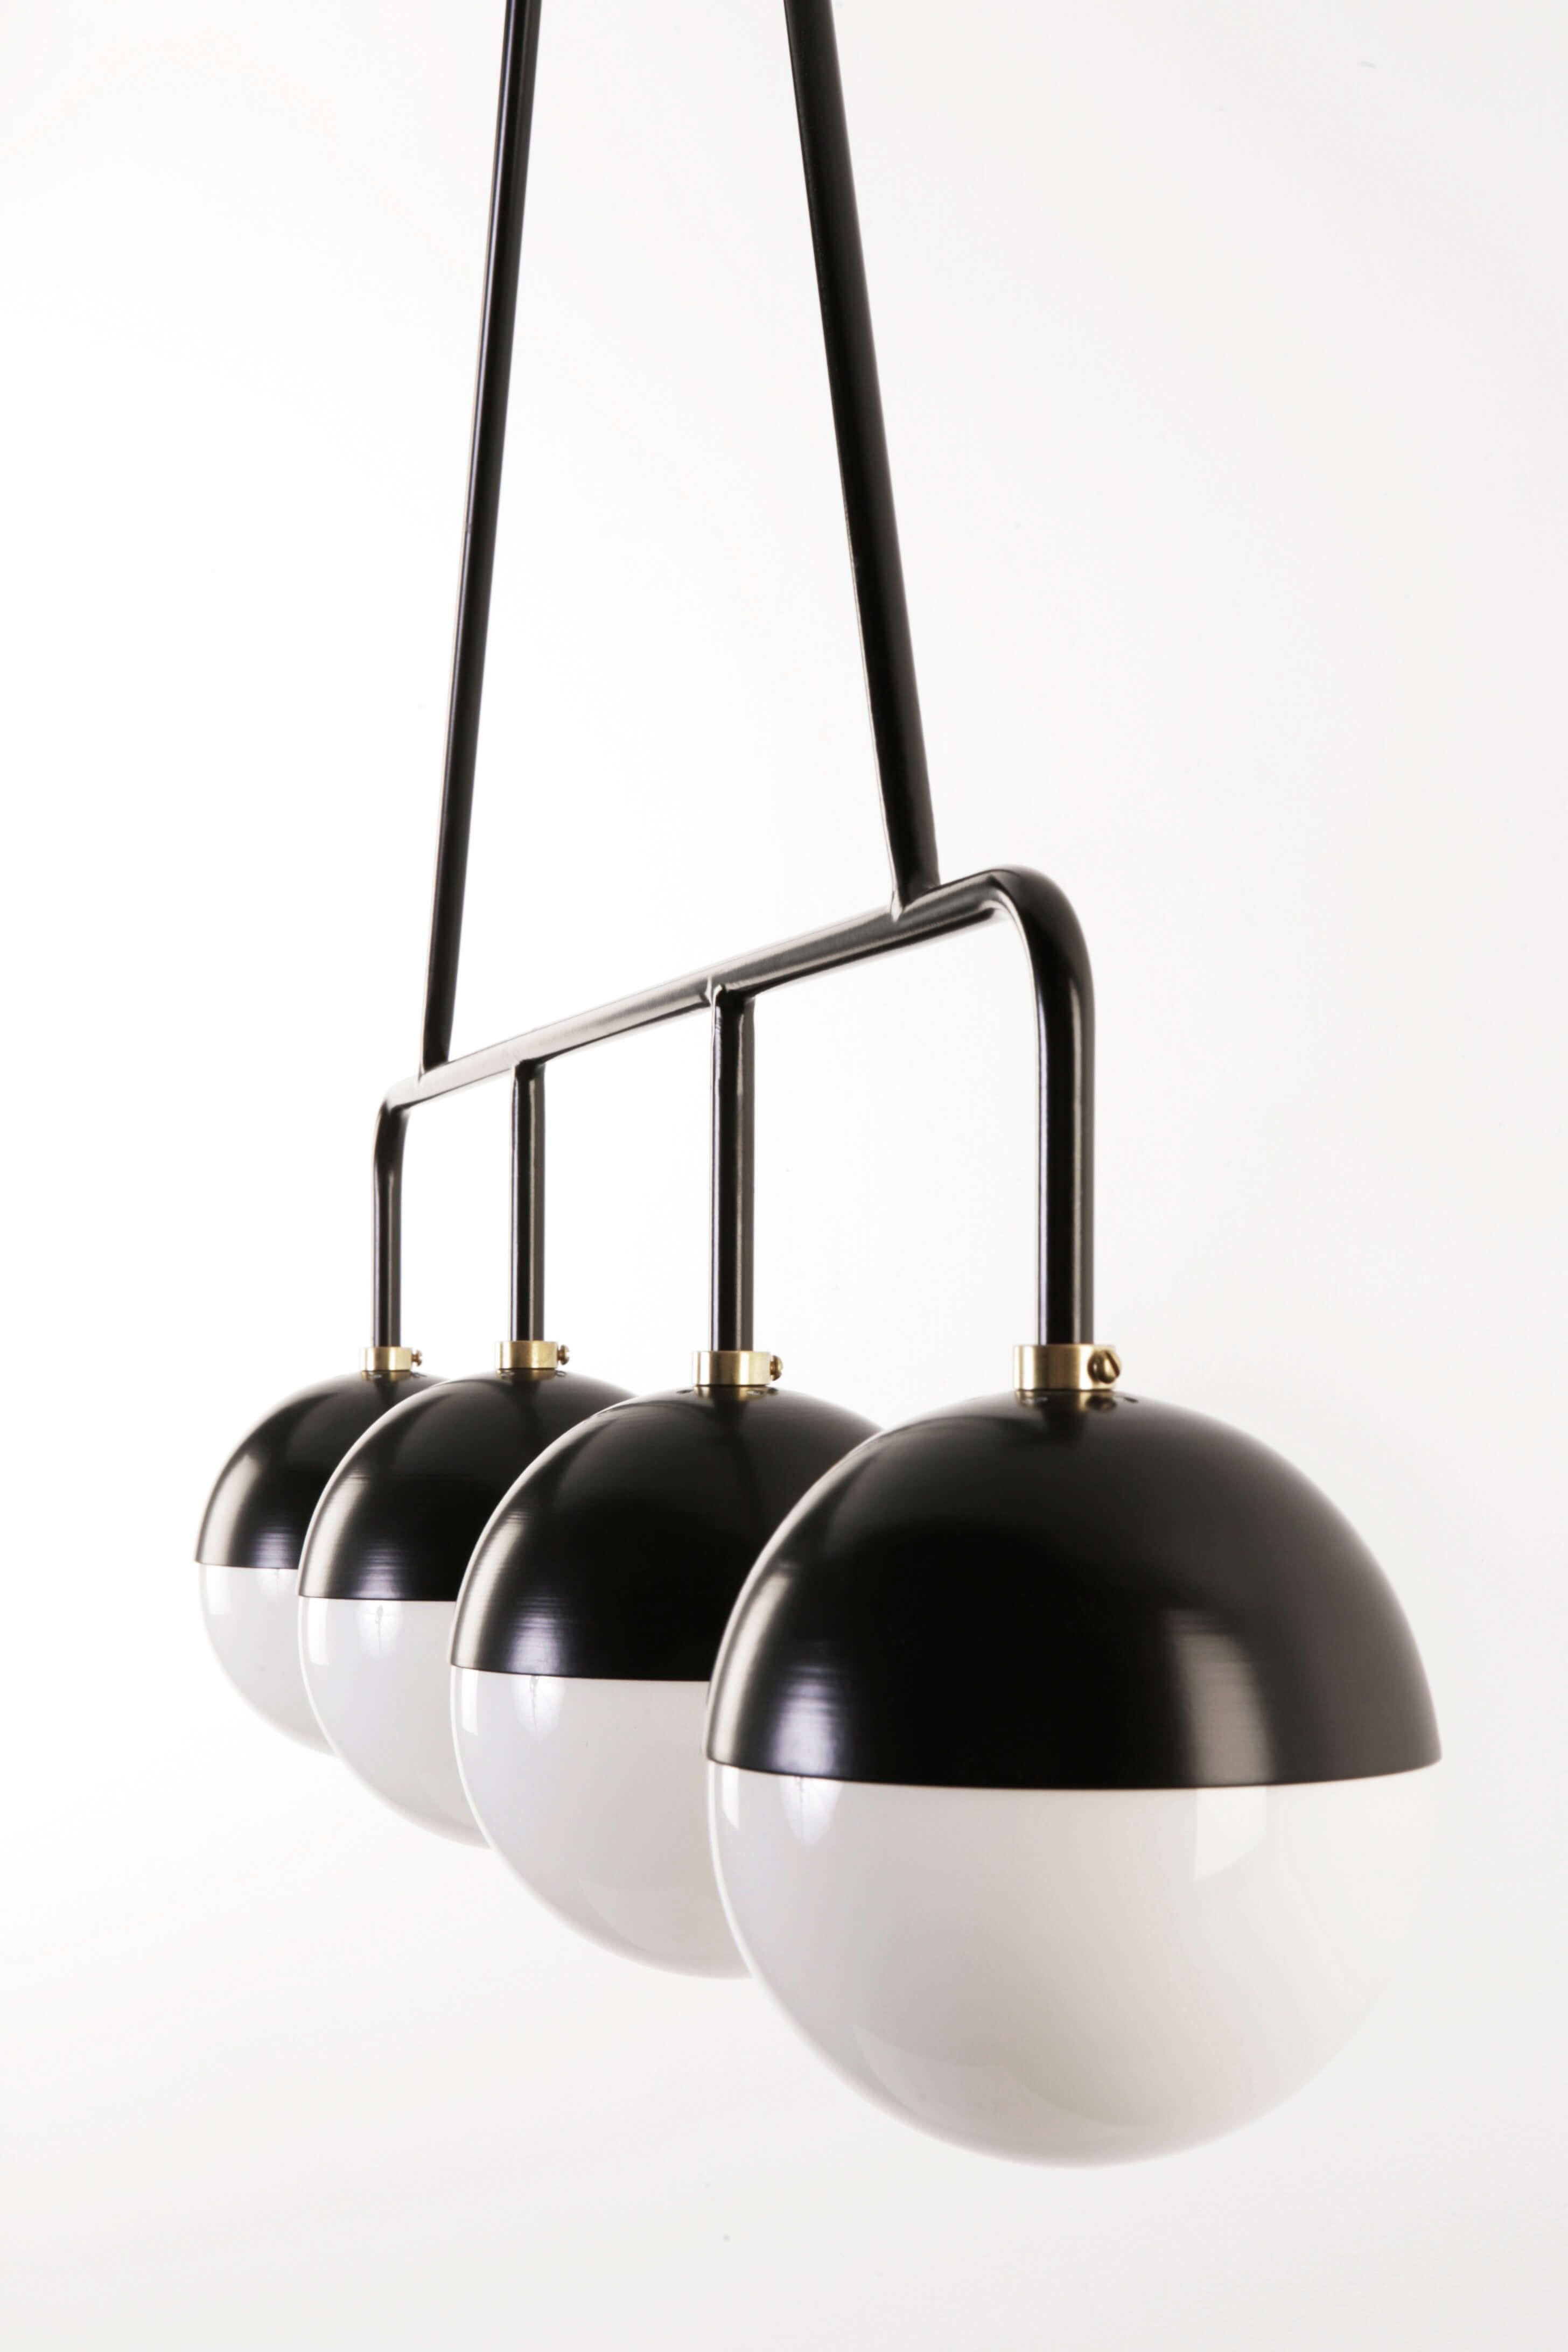 Playful and graphic, the Balise is inspired by the 1960s and the irreverence of Jean Roye're. The Bailse is fabricated in black powder-coated steel with a 6